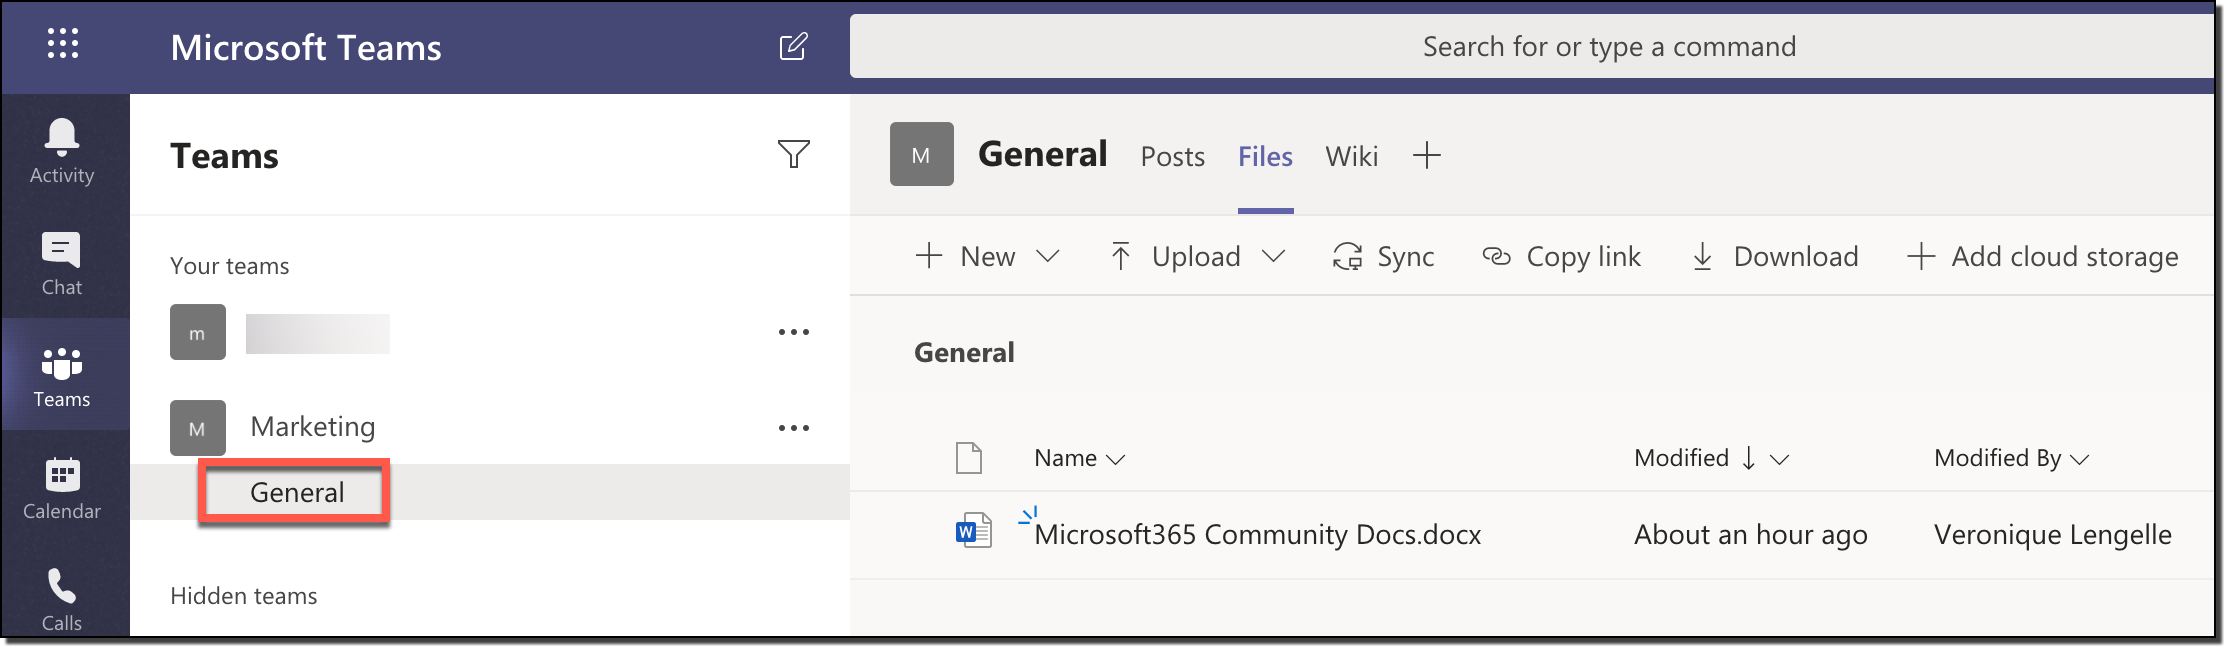 Image of the General channel in a Microsoft Teams team.